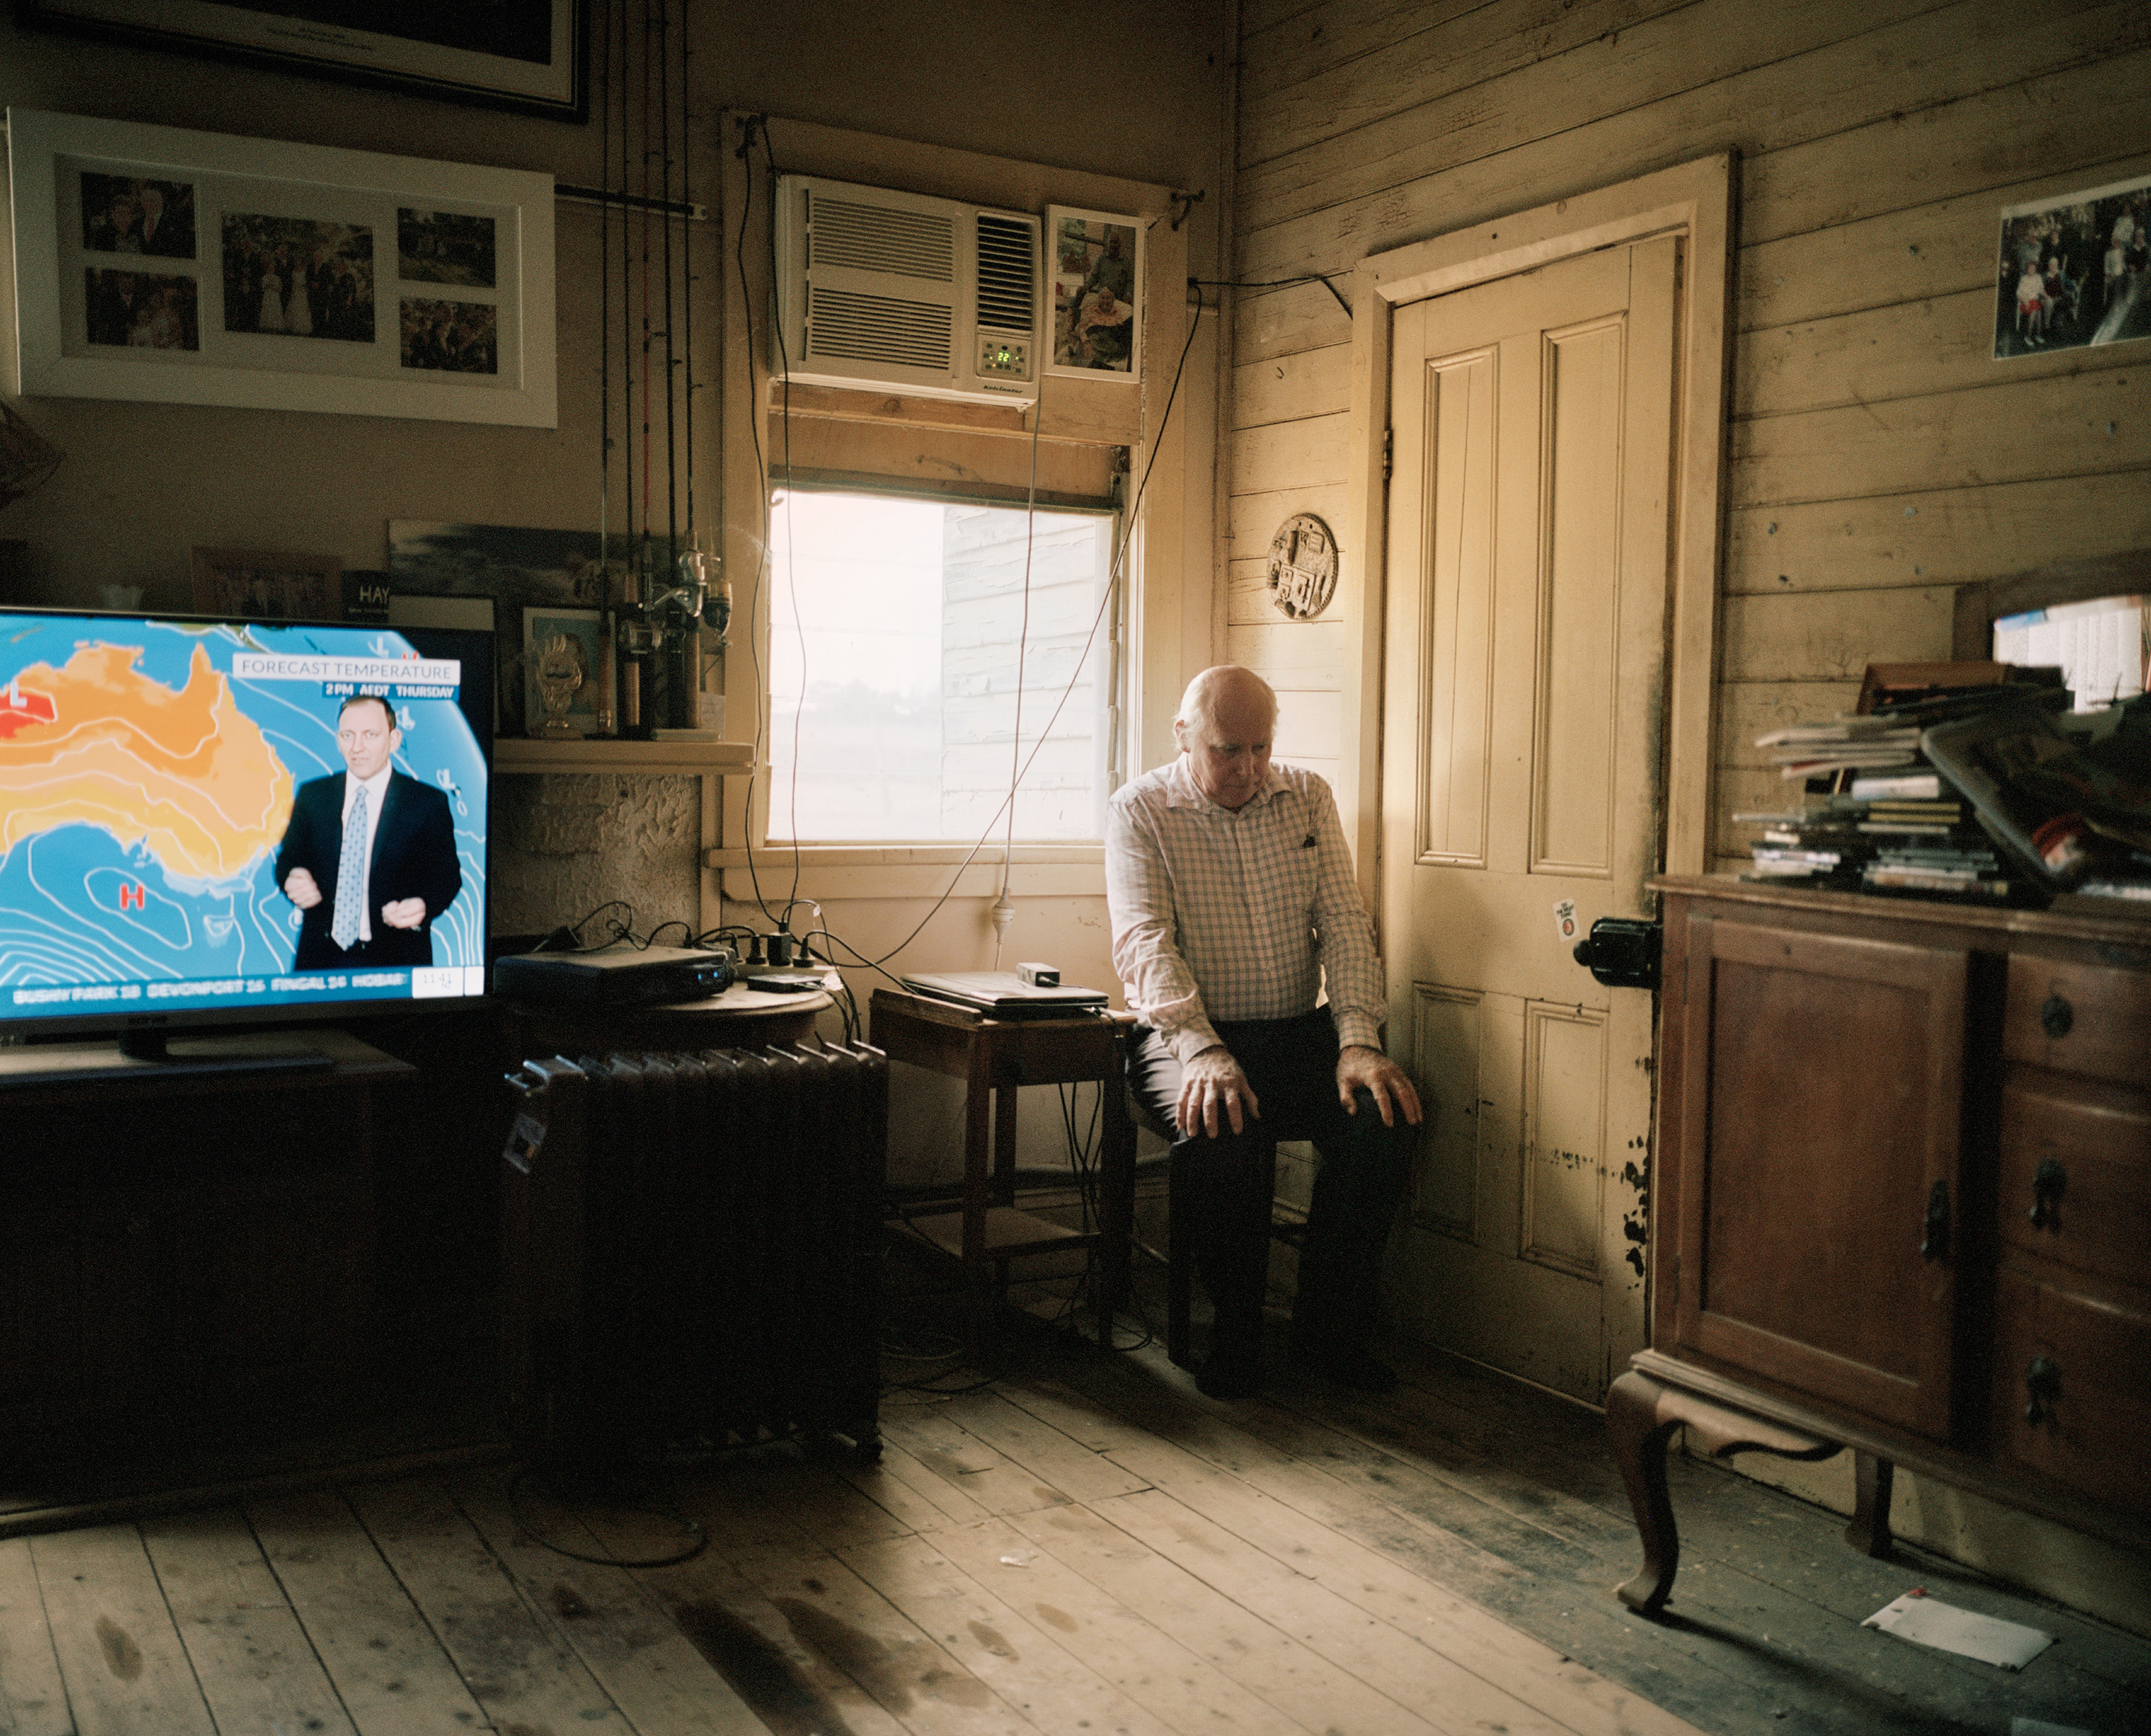 Farmer Jack Slack-Smith, 65, listens to a weather report in his living room on Epping Farm in New South Wales, Australia, in November 2018. The drought has reduced its sheep stock from 7,000 to approximately 3,600, and cattle from 260 breeders to 22. March 4 issue. (Adam Ferguson for TIME)